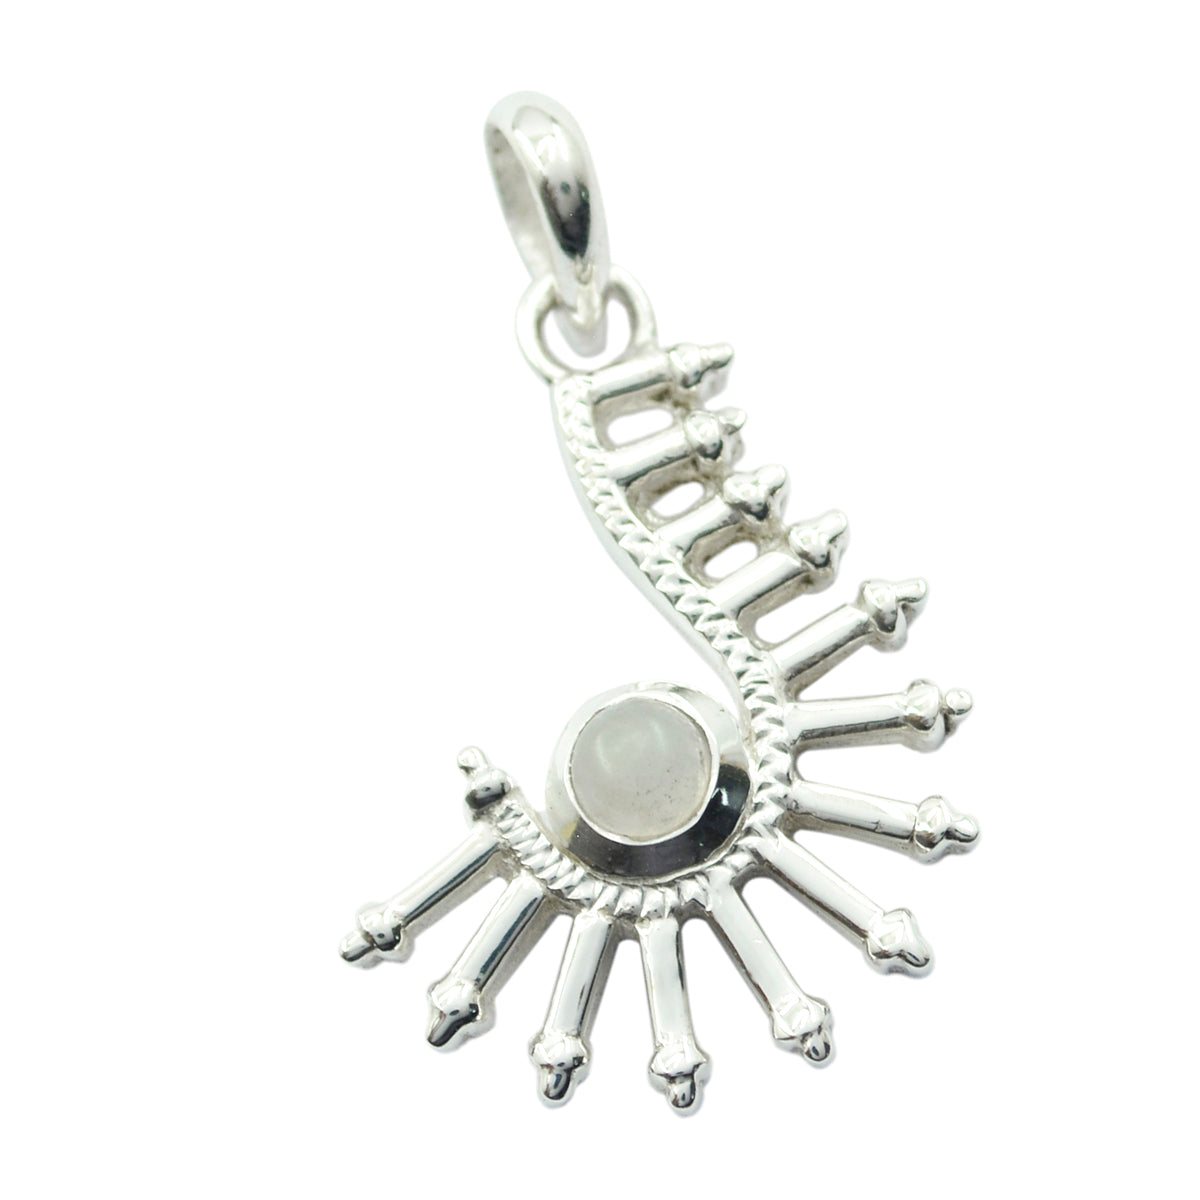 Riyo Charming Gems Round Cabochon White Rainbow Moonstone Solid Silver Pendant Gift For Good Friday